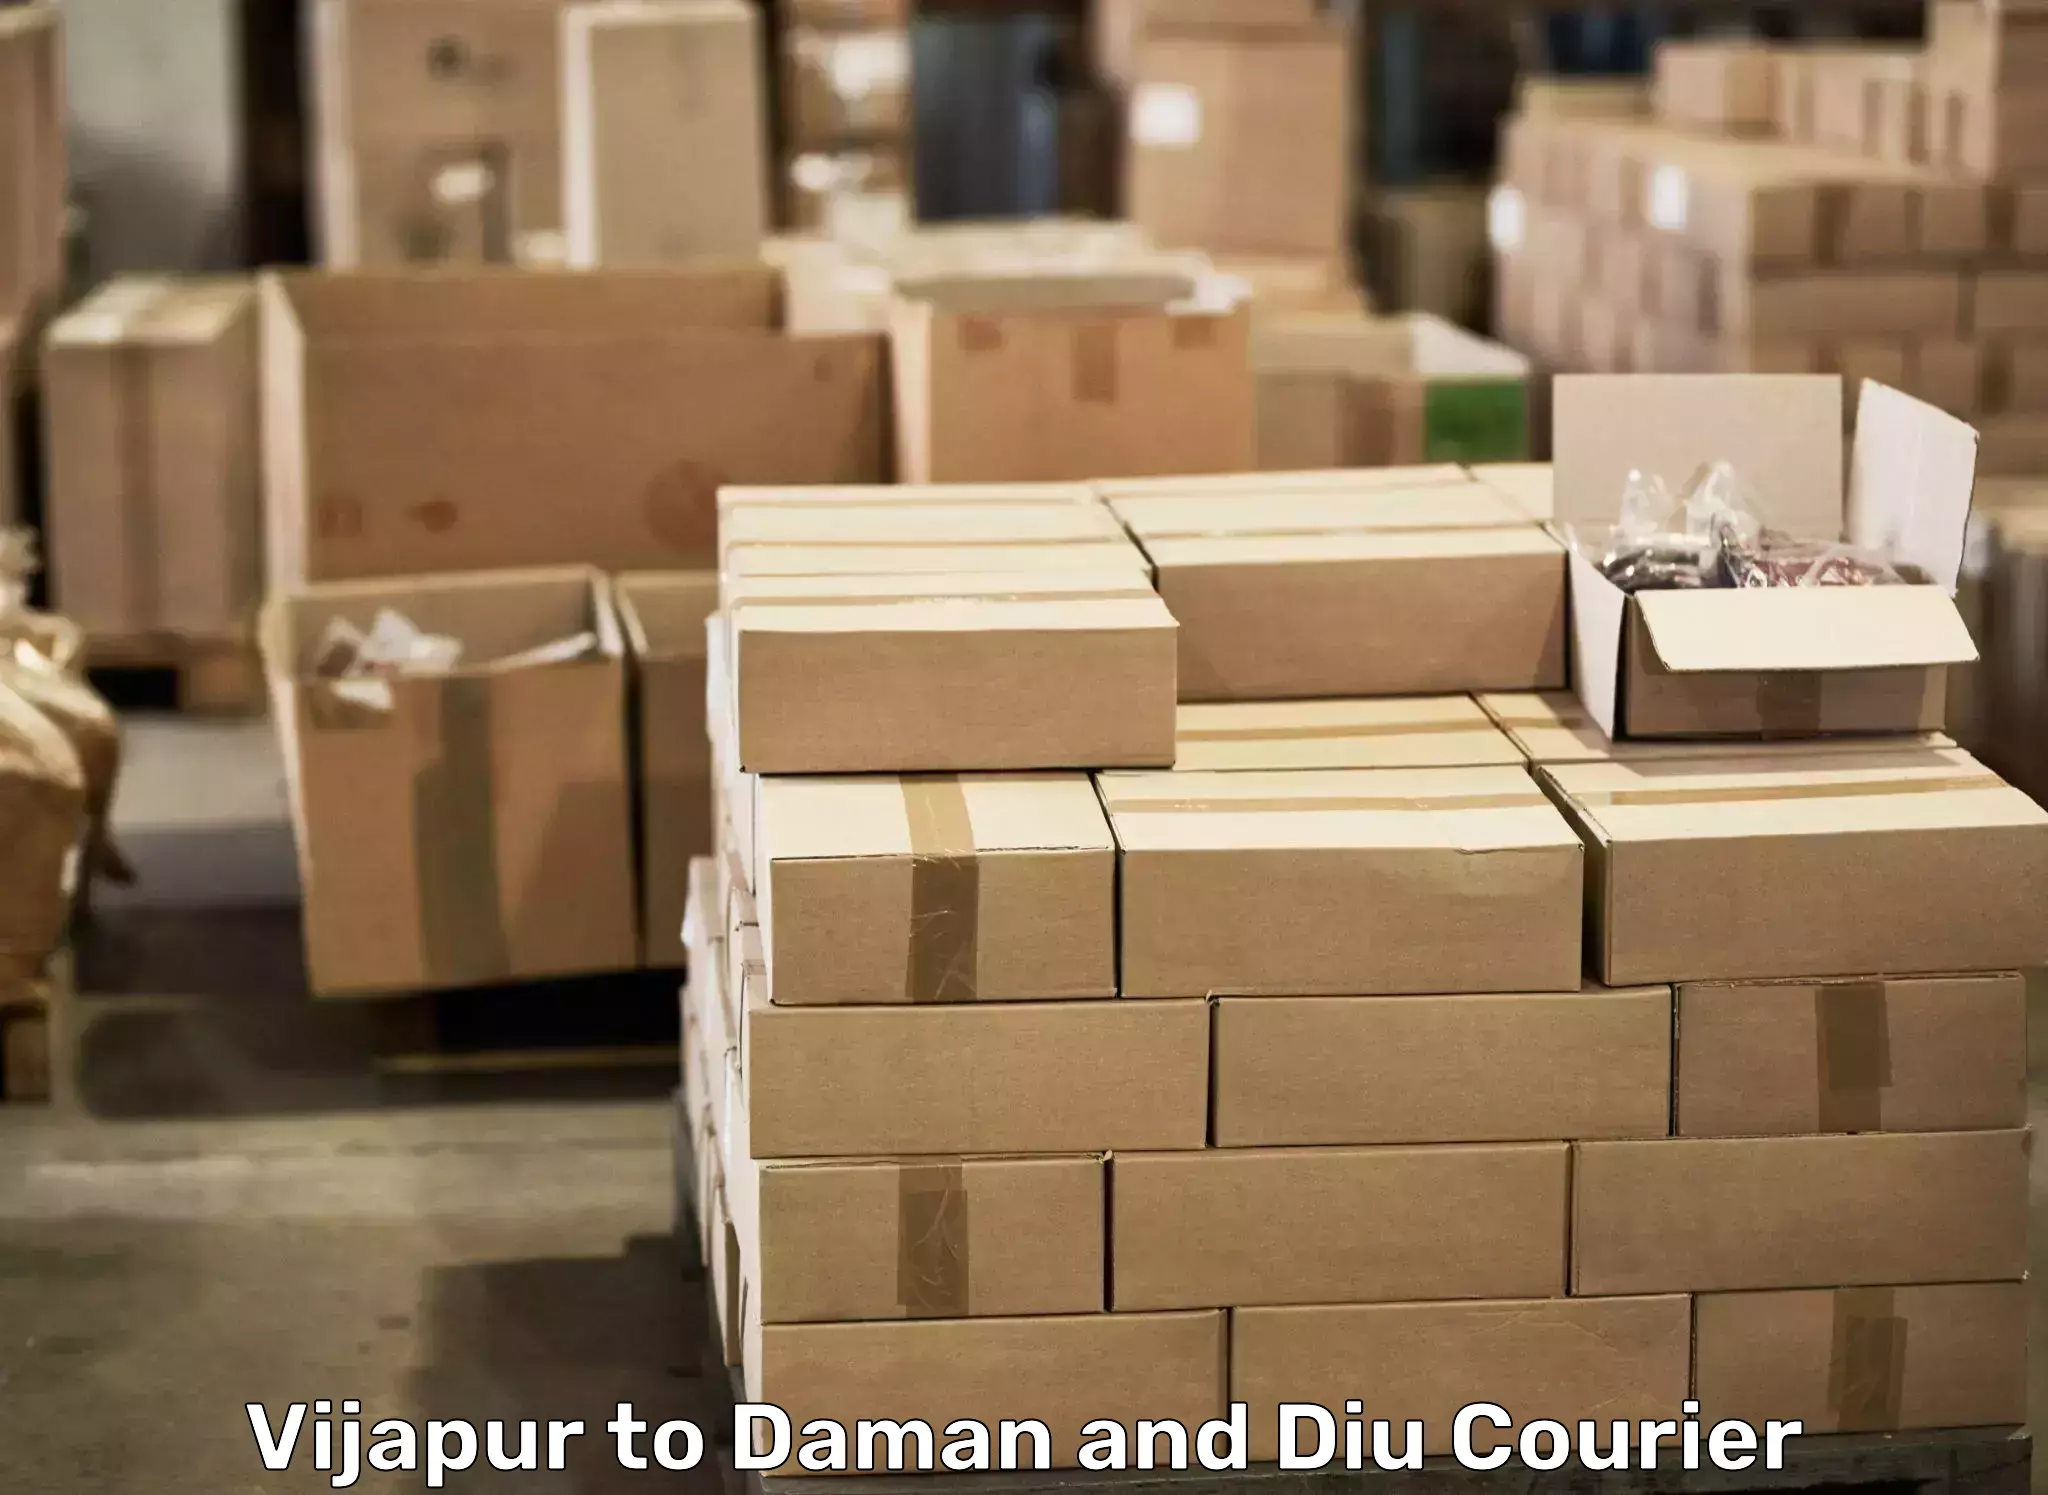 Trusted relocation services Vijapur to Diu